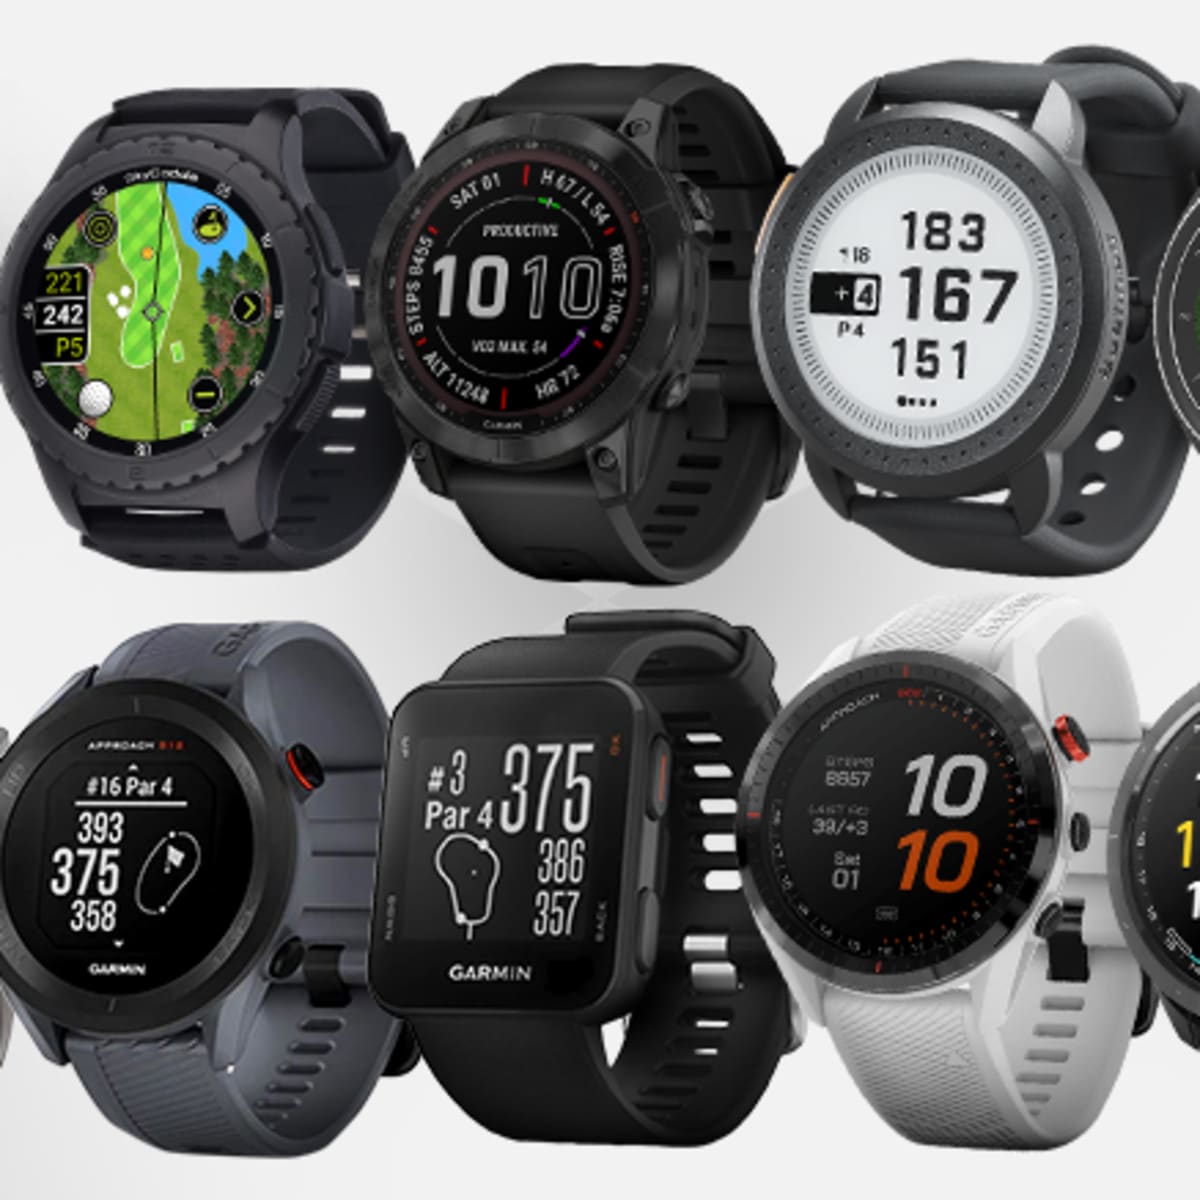 GPS Running Watch - Why some are $200 and some almost $1,000 ?